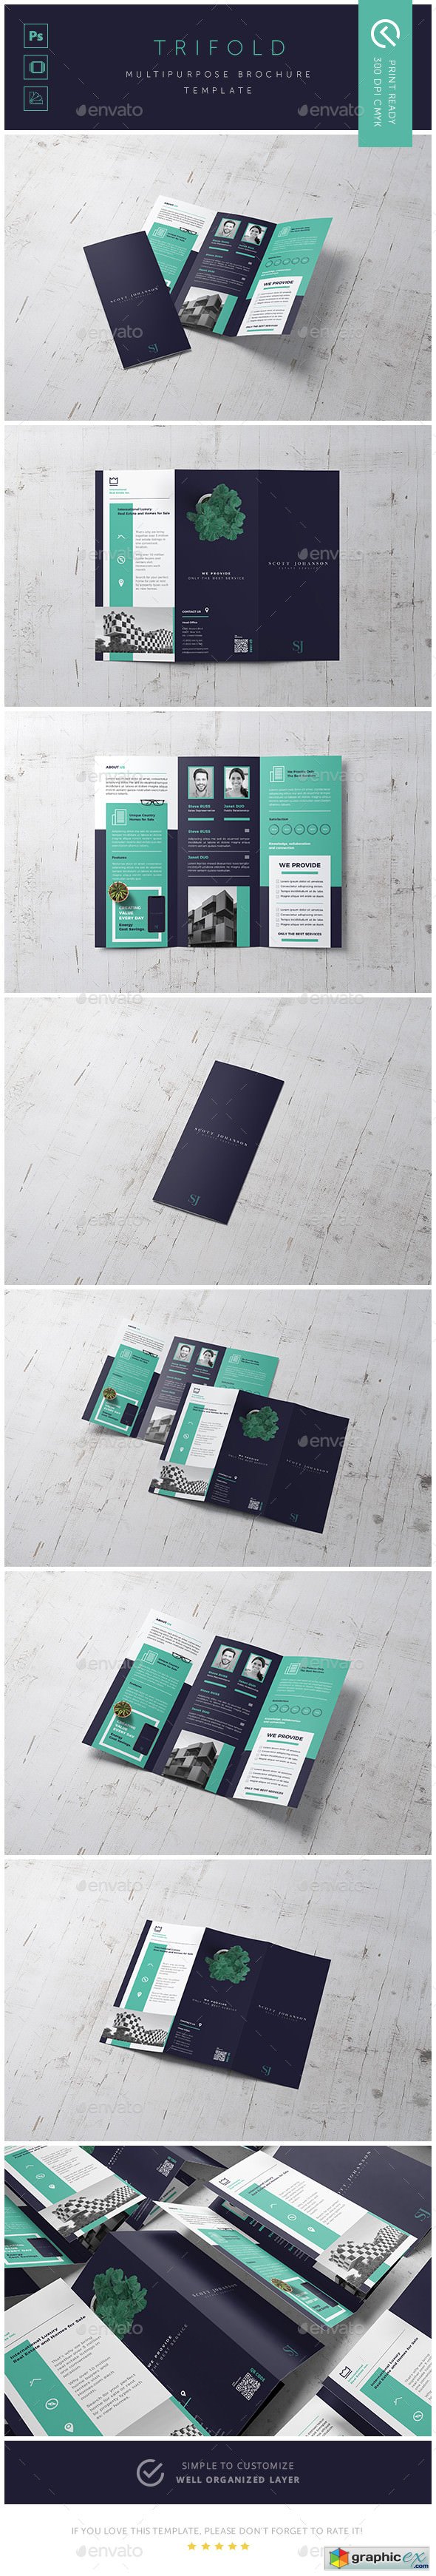 Corporate Business Trifold Brochure Template